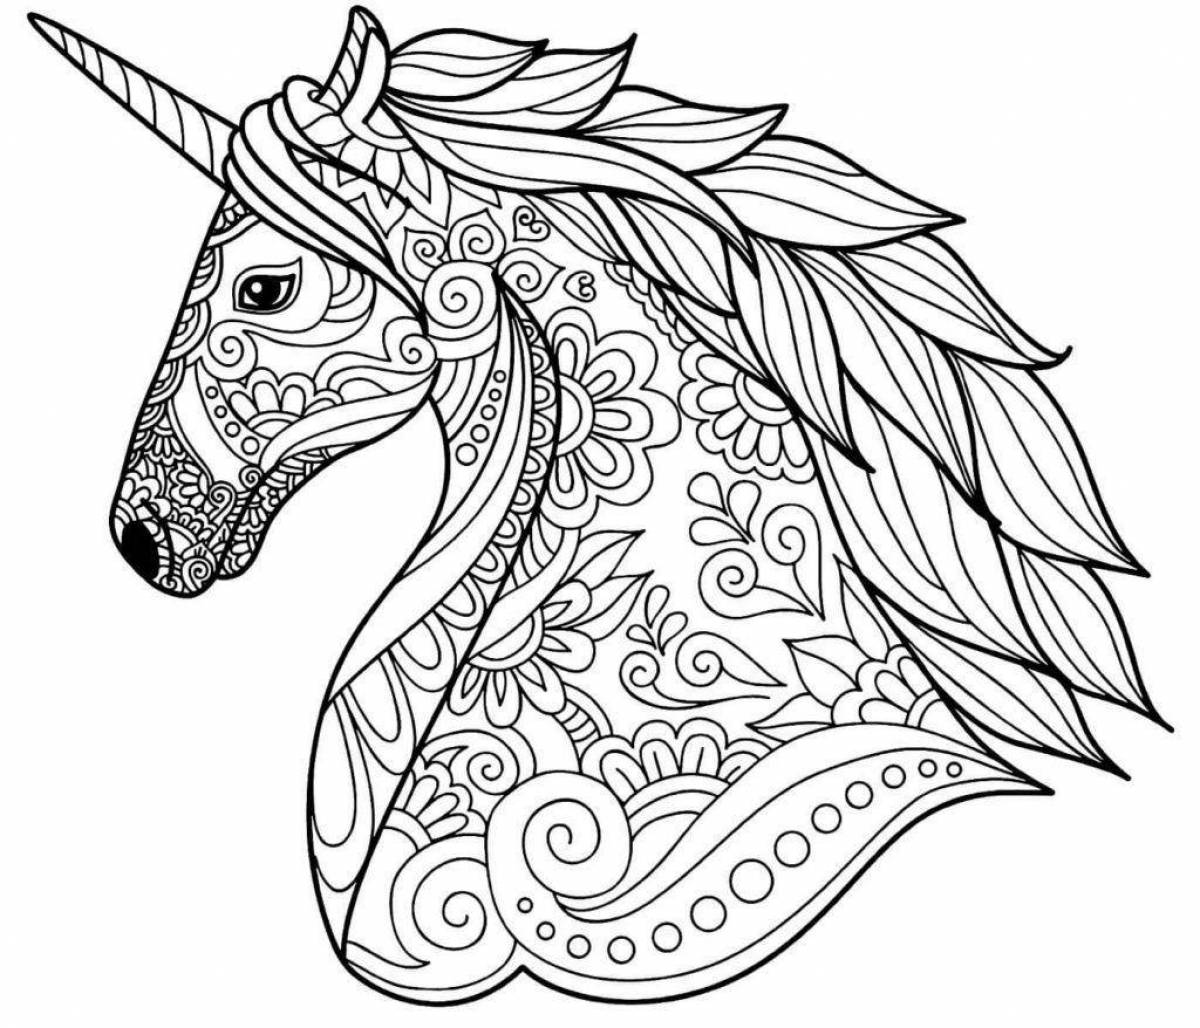 Awesome coloring unicorn complex